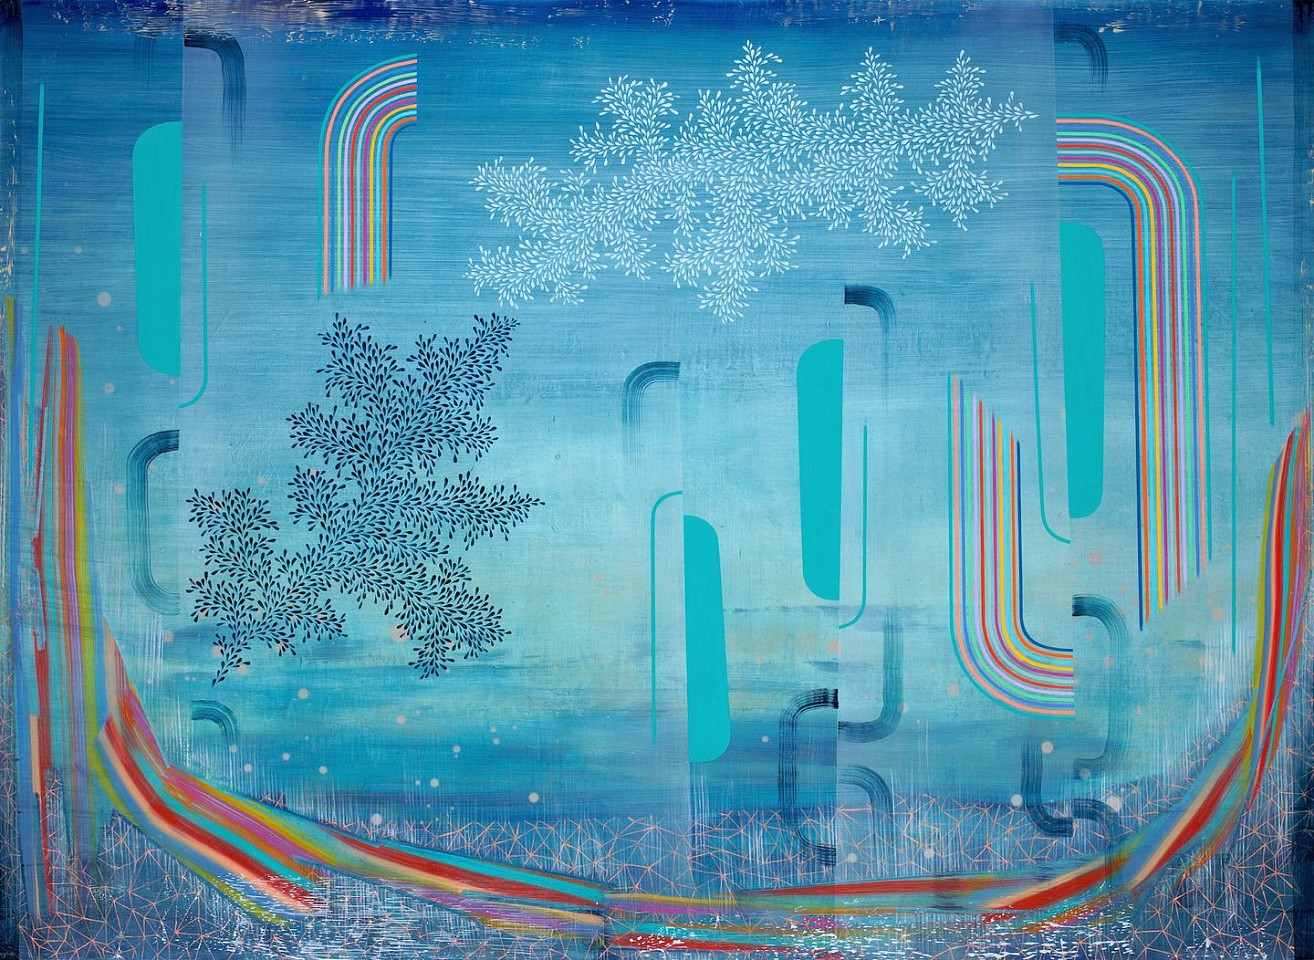 Gabe Brown
Blue Vista, 2023
BROW164
oil on linen over wood panel, 35 x 48 inches